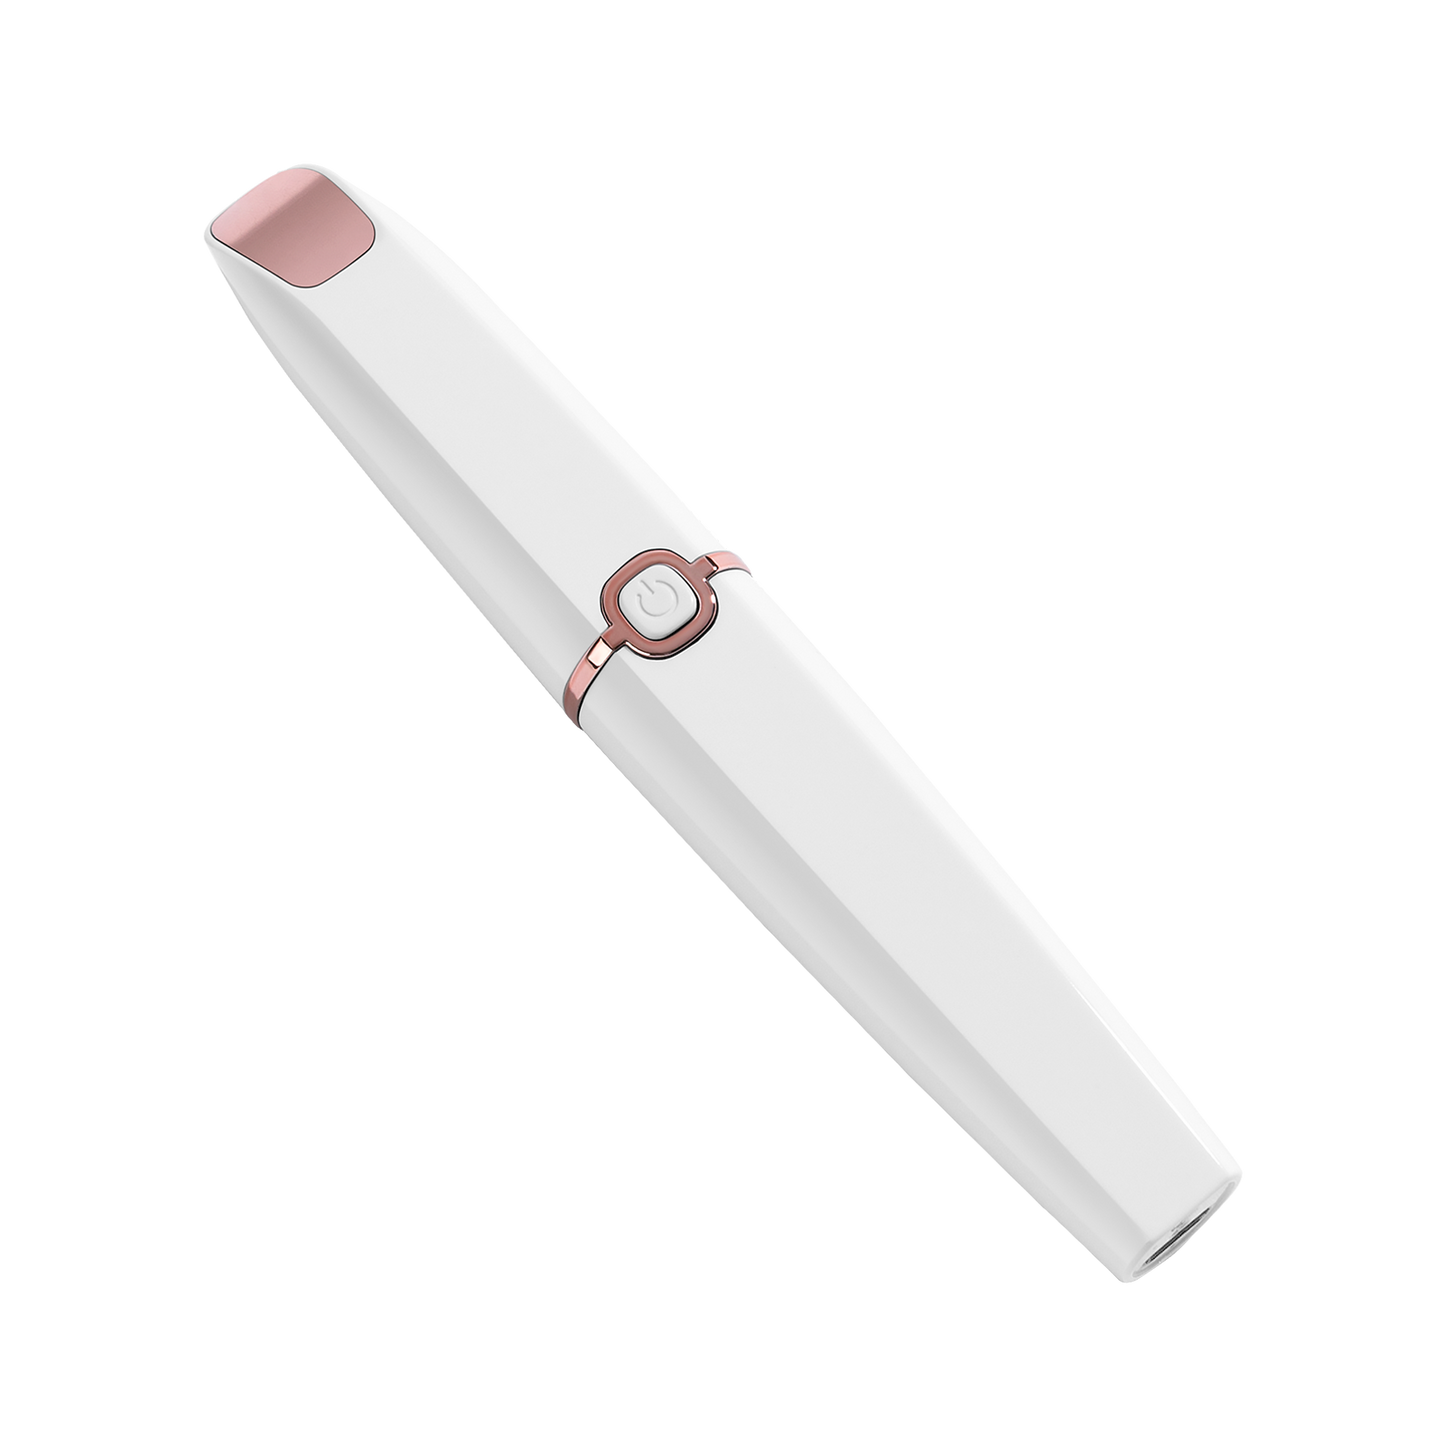 Rejuuv Rechargeable Eyebrow Hair Remover with Built-in LED Light, White